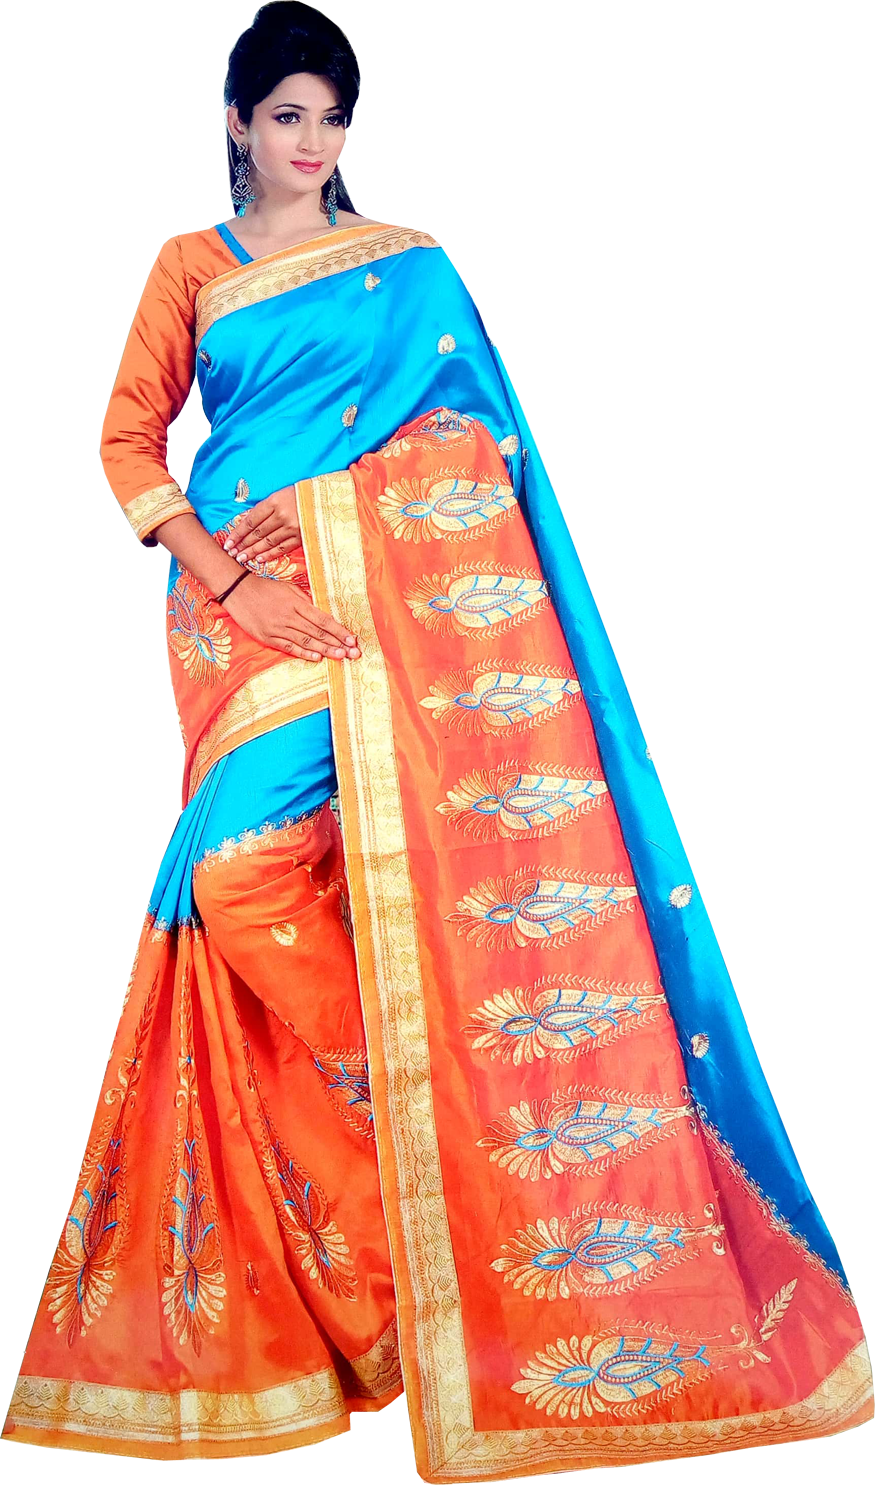 Embroidered Synthetic saree Limited offer Ã¢â€šÂ¹800   20% Off @Vmaxo